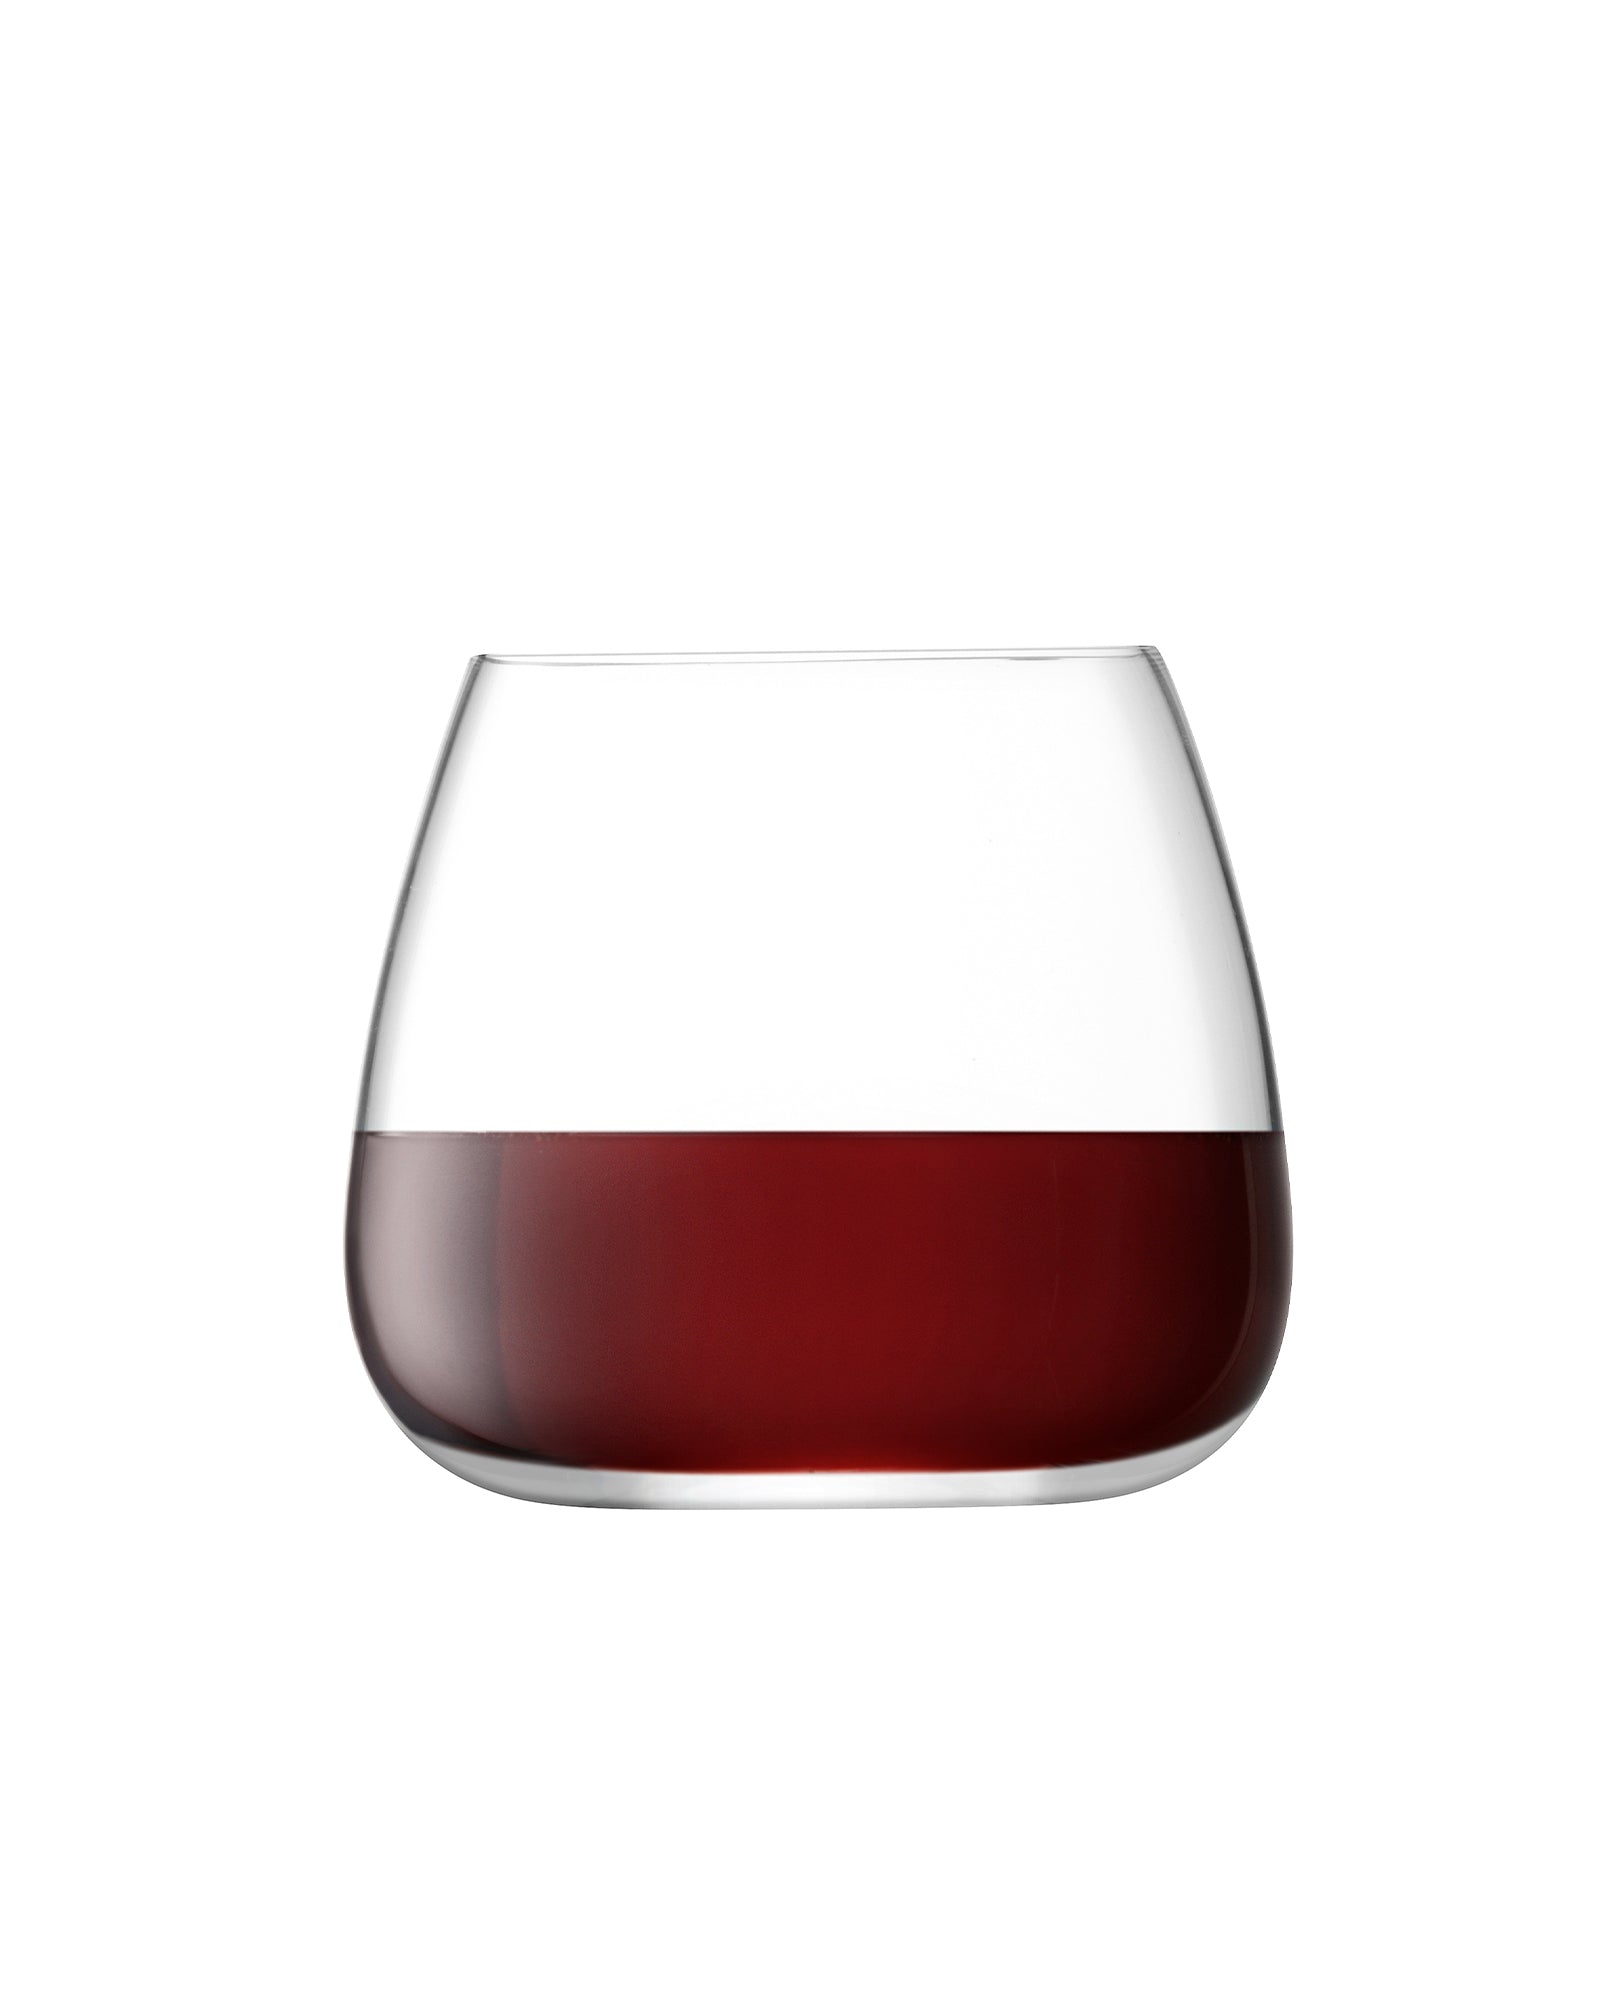 https://cdn.shopify.com/s/files/1/1298/9077/products/WU01-AW17-WineCulture-WineCultureStemlessWineGlass385mlClearx2-Cutoutpropped-Portrait-jpg.jpg?v=1663361063